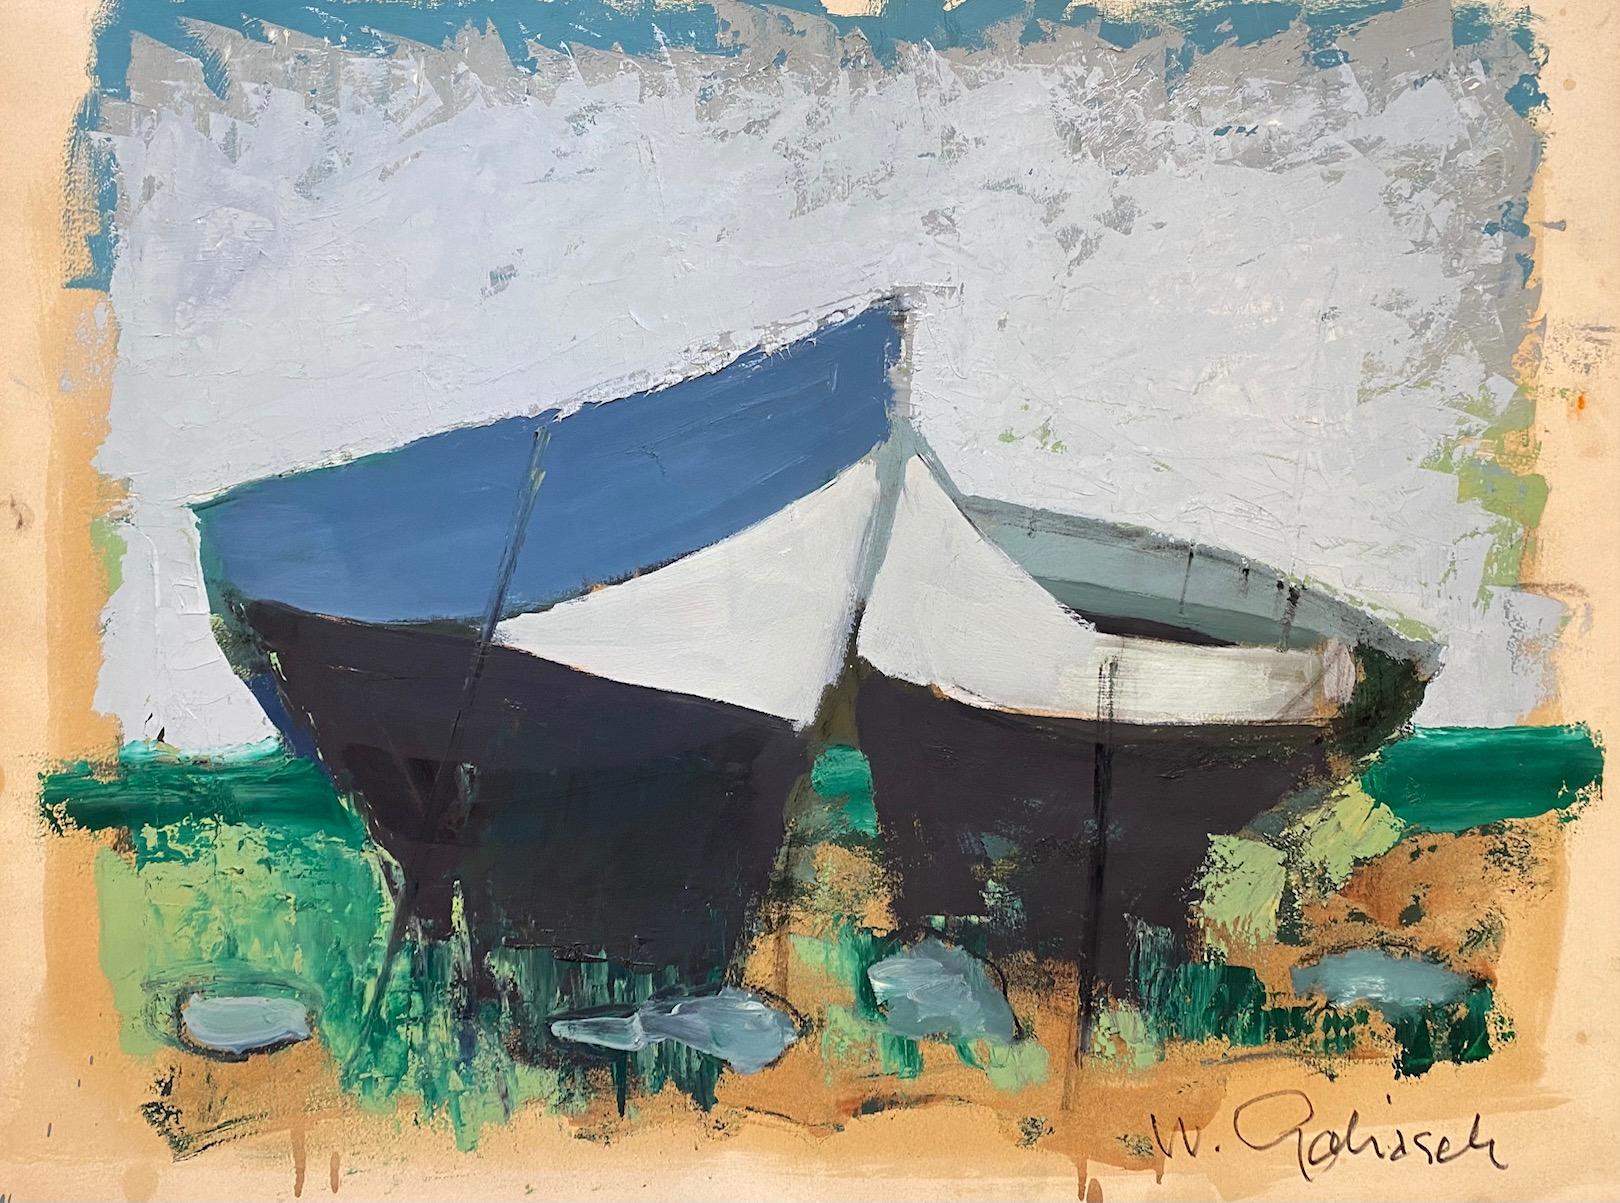 The two boats by William Goliasch - Gouache on paper 50x65 cm 